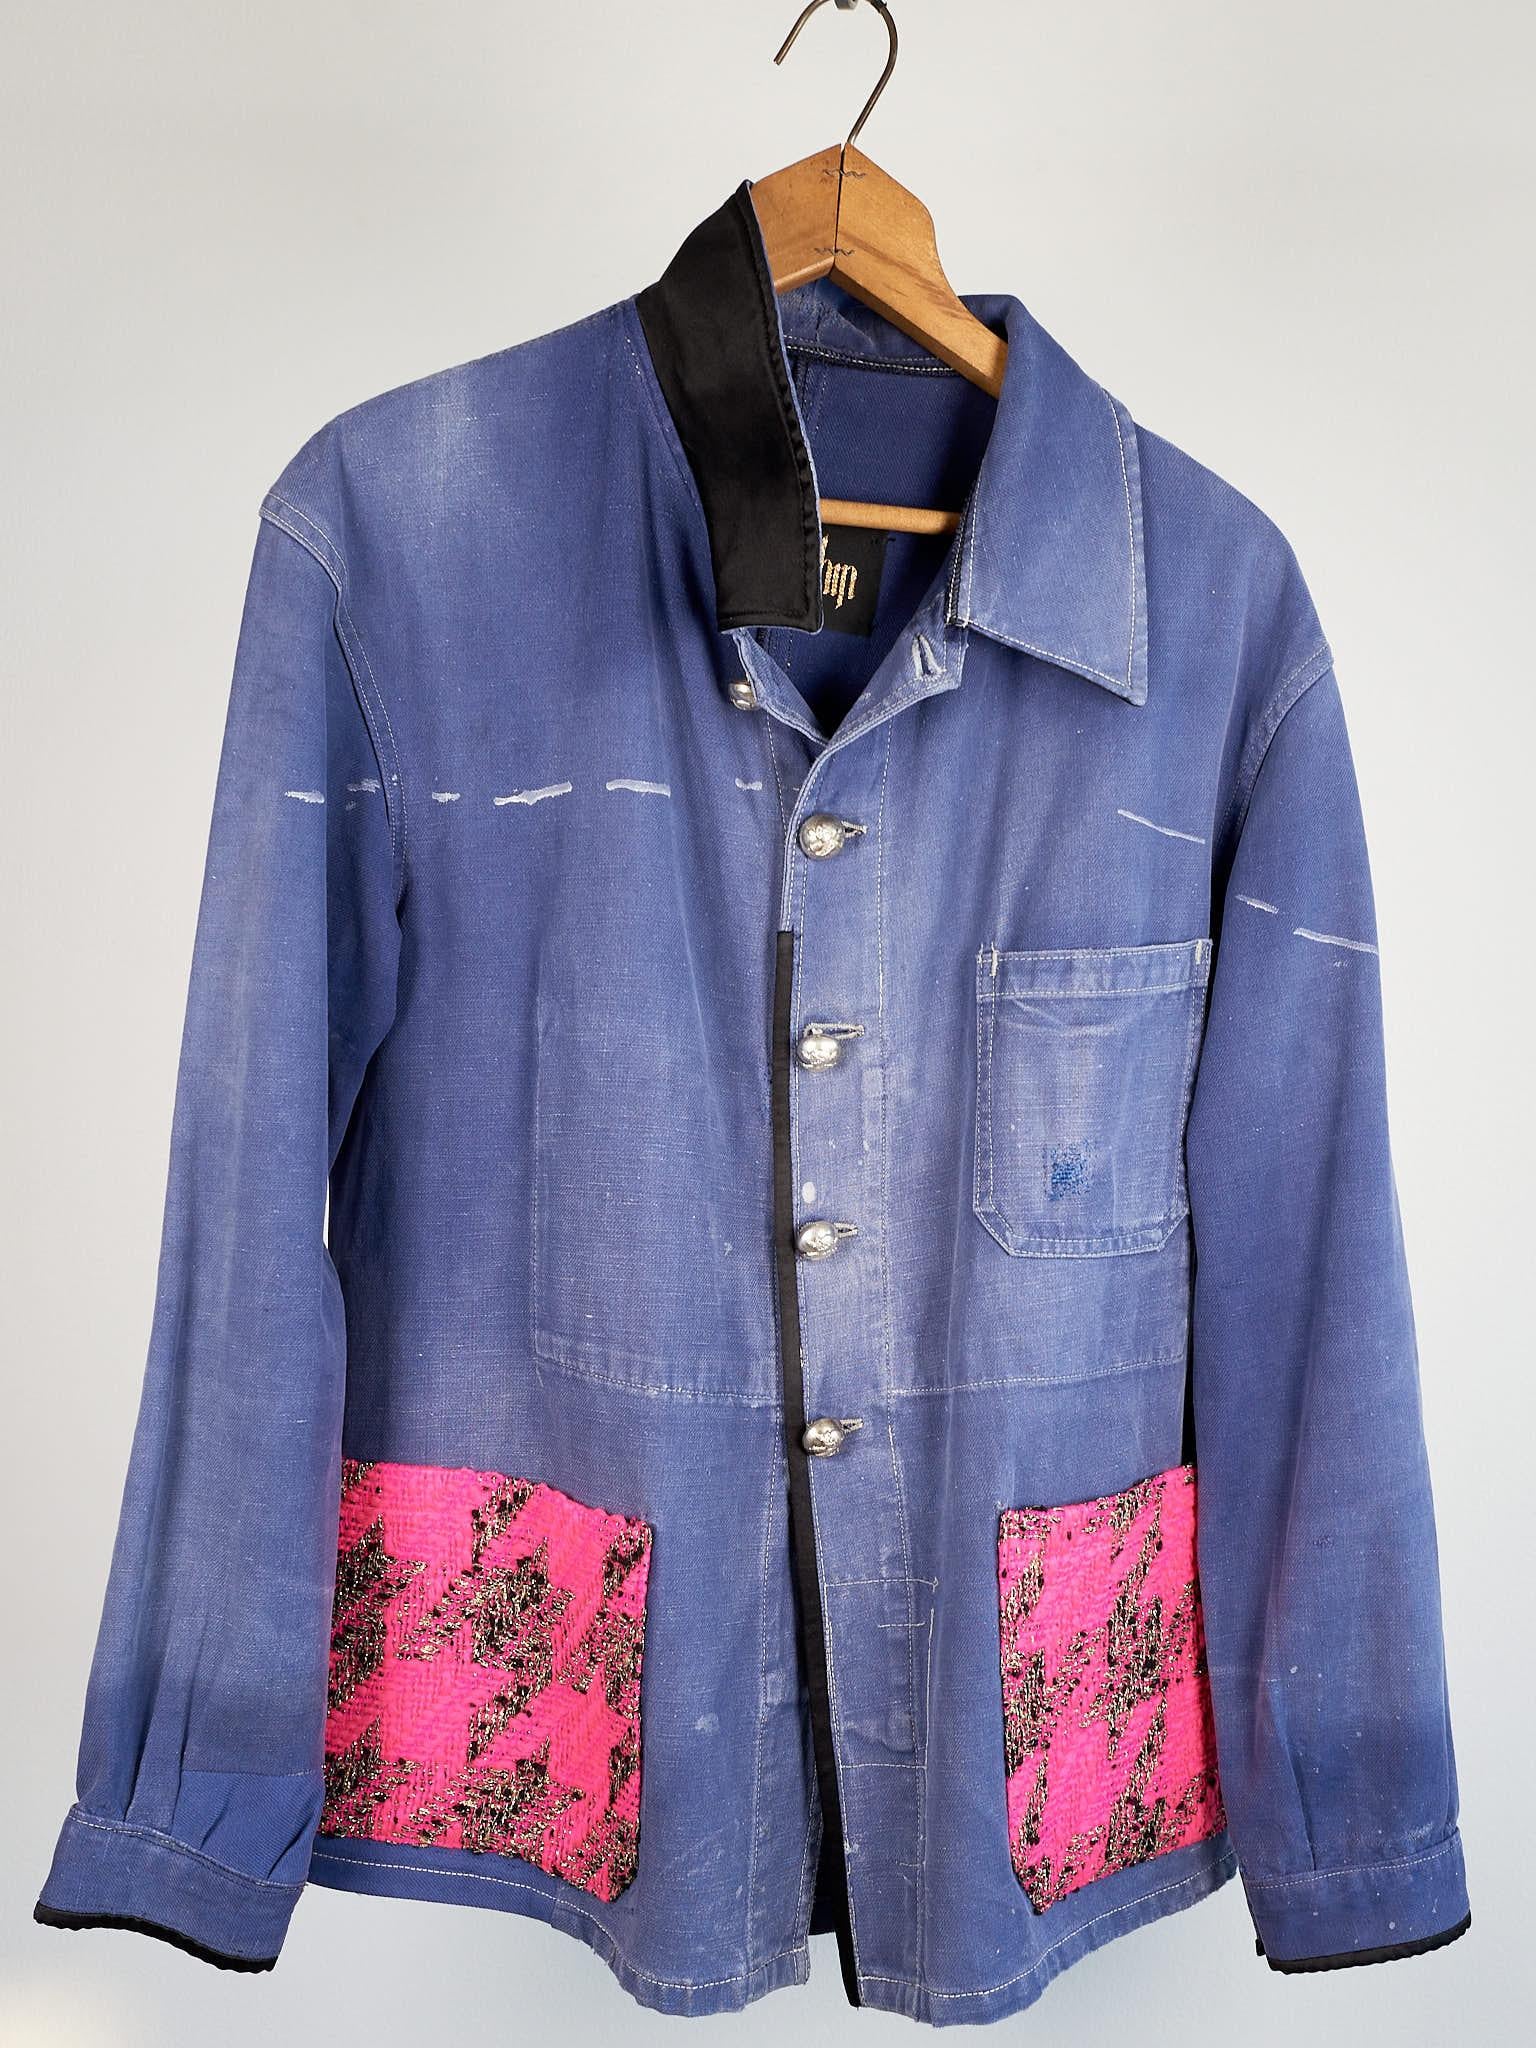 blue french workers jacket